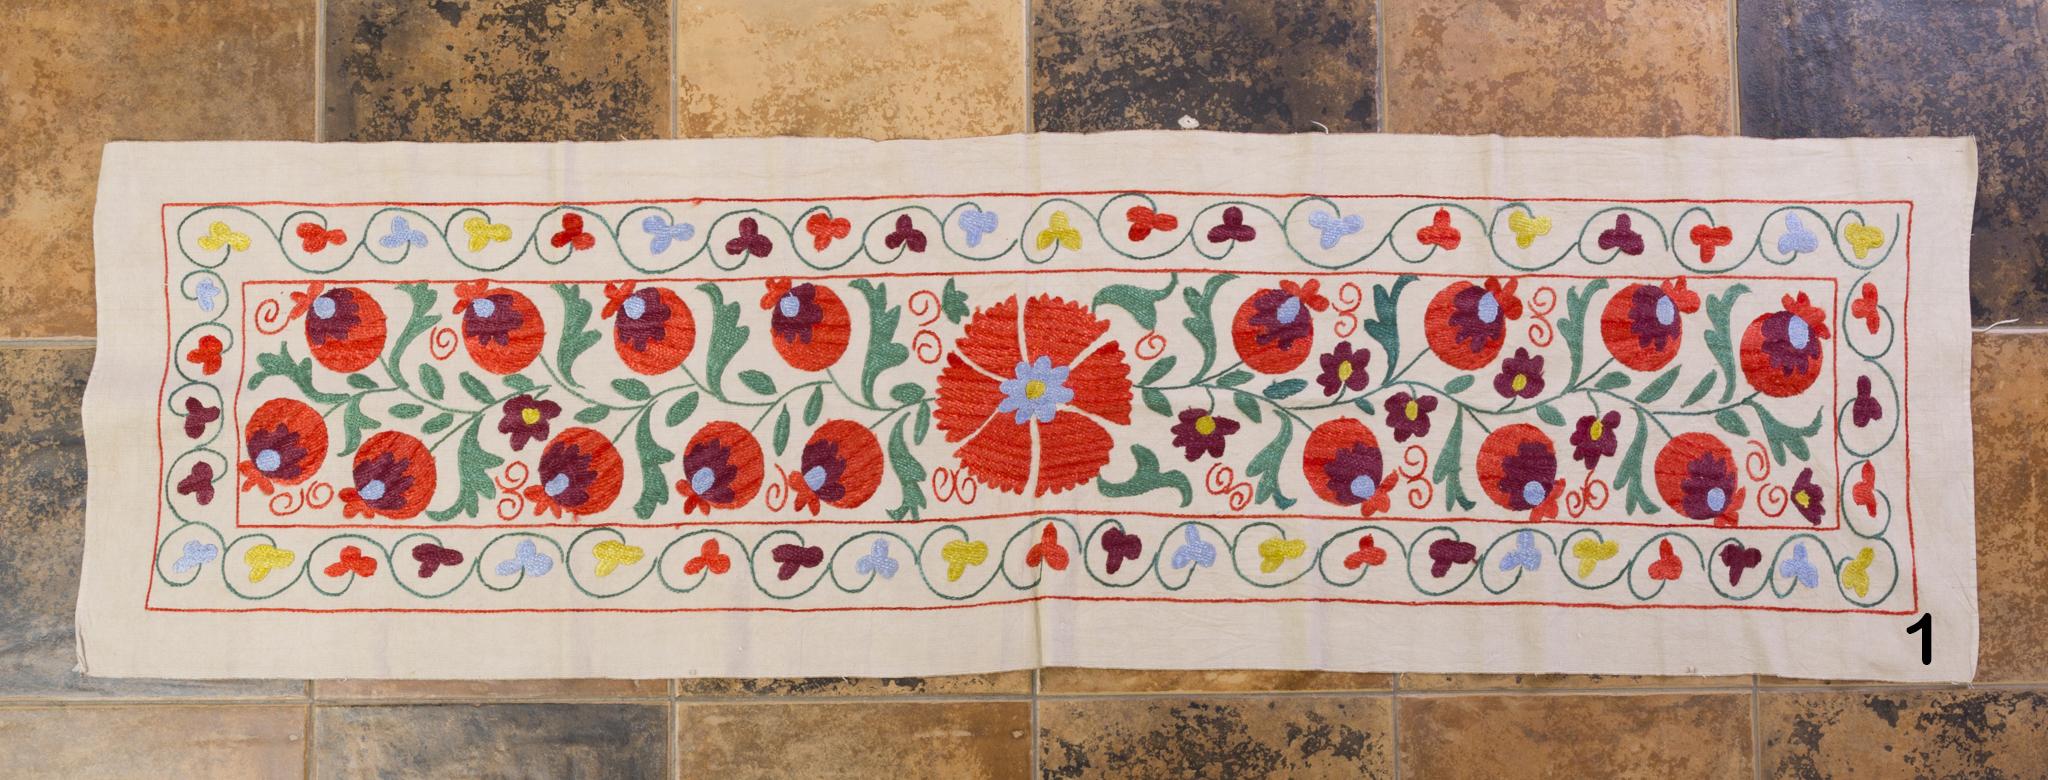 Original beautiful embroidered strips from the far Turkmenistan. Made by village women, they represent the flowers and nature around their tents: pomegranates are a symbol of health and fertility.
To be placed on the table or on the back of the